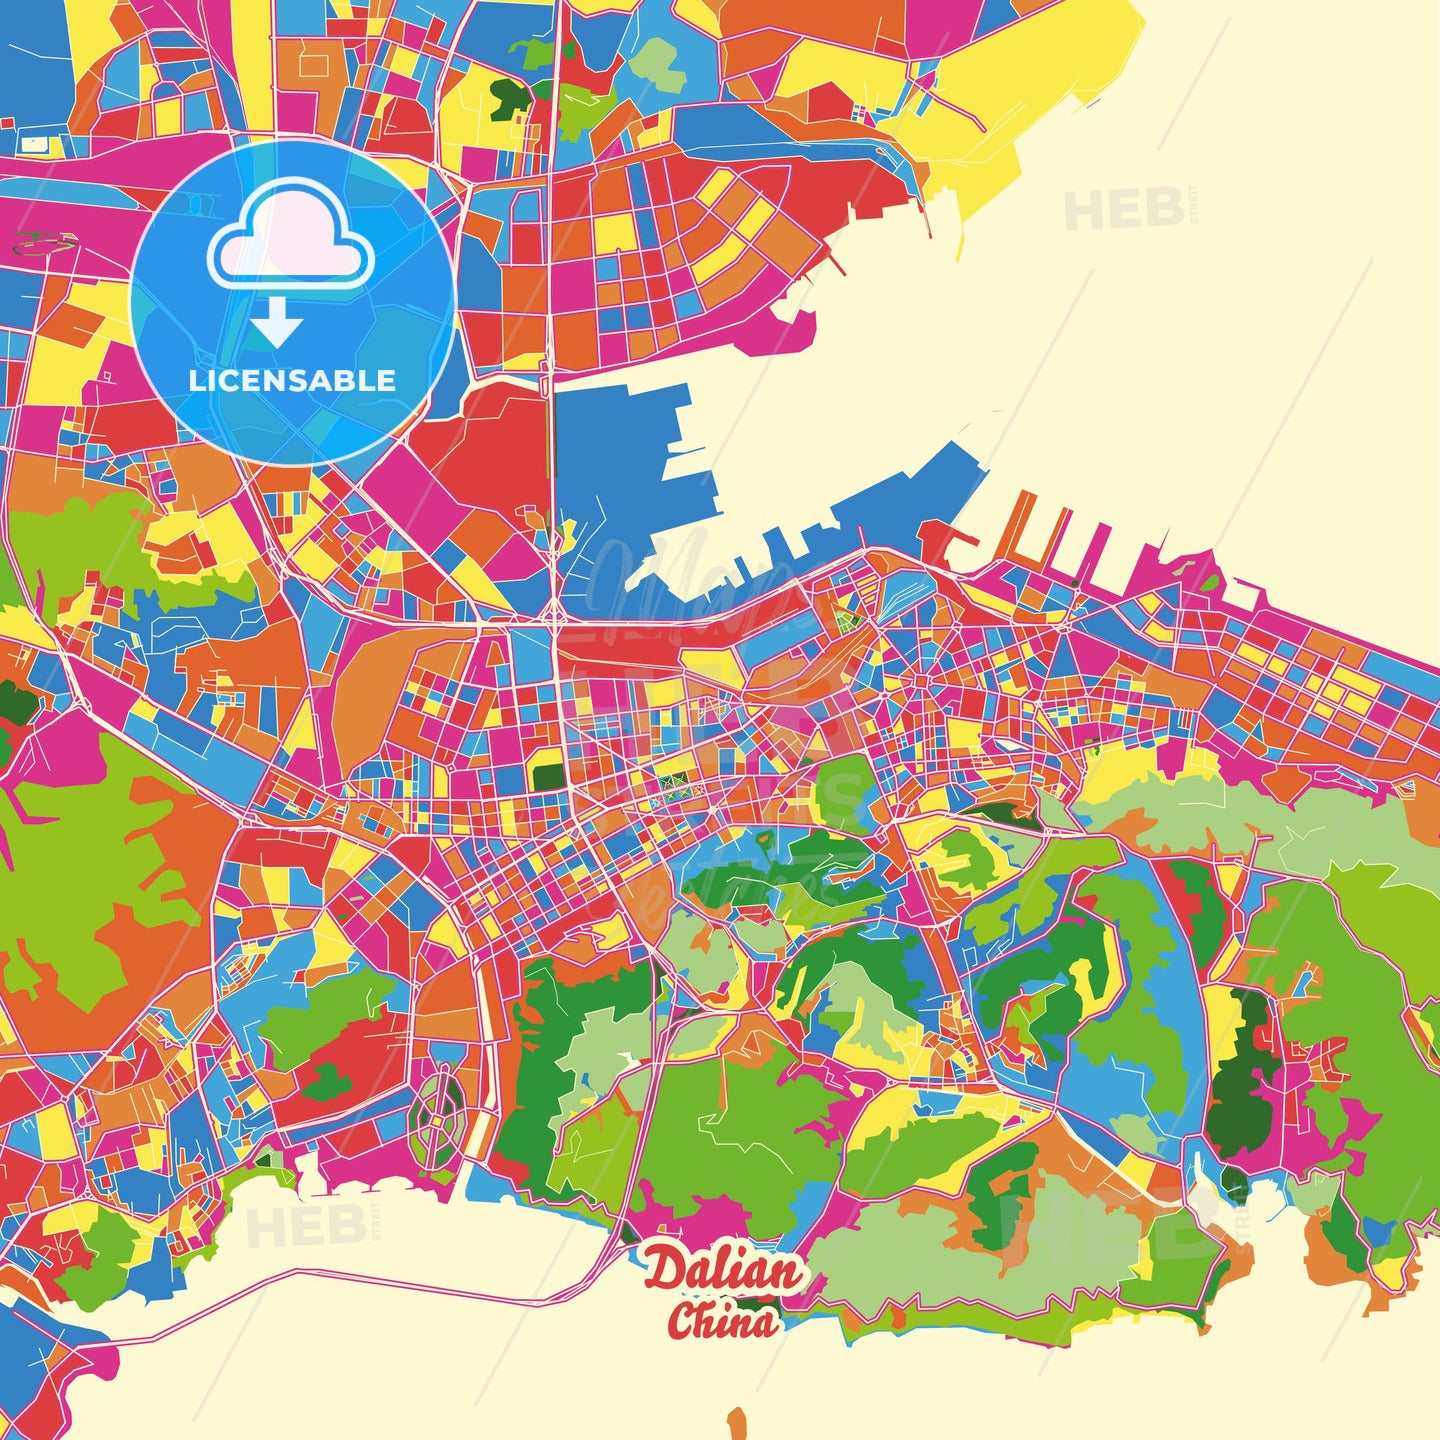 Dalian, China Crazy Colorful Street Map Poster Template - HEBSTREITS Sketches